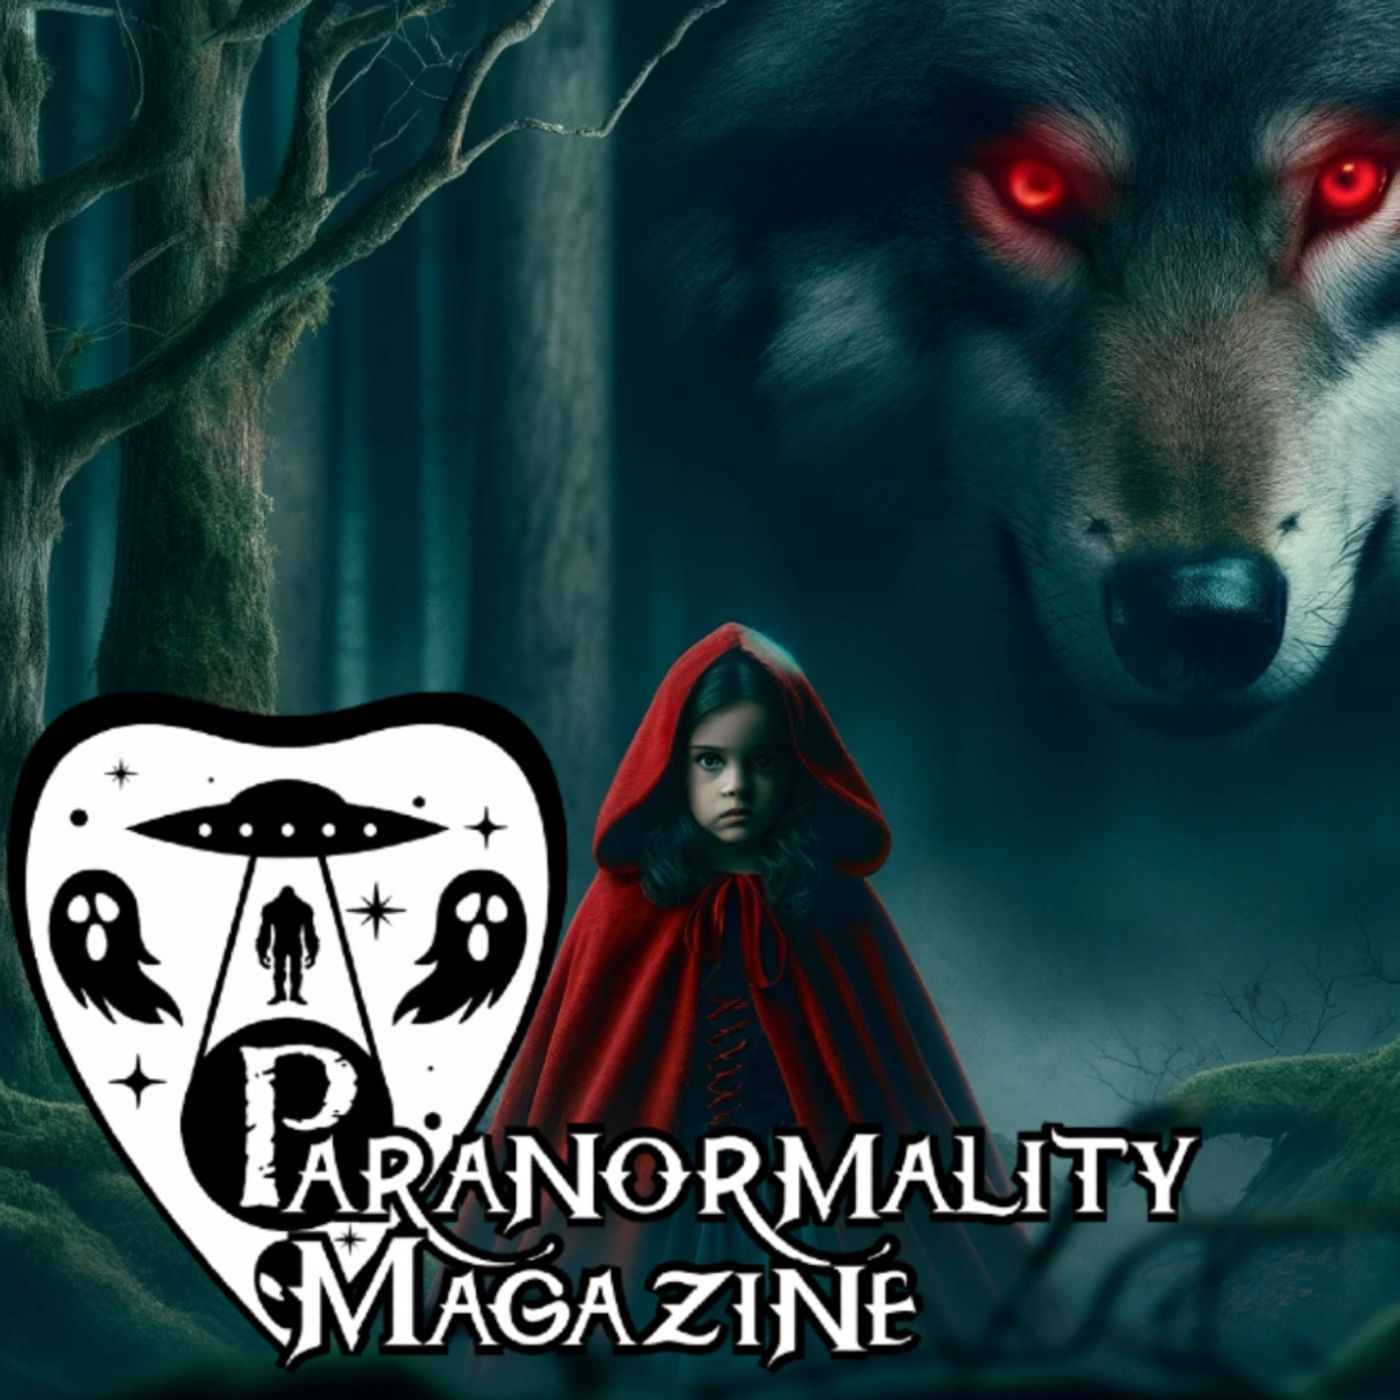 “THE DARK SIDE OF FAIRY TALES” and More Fortean-Related Stories! #ParanormalityMag